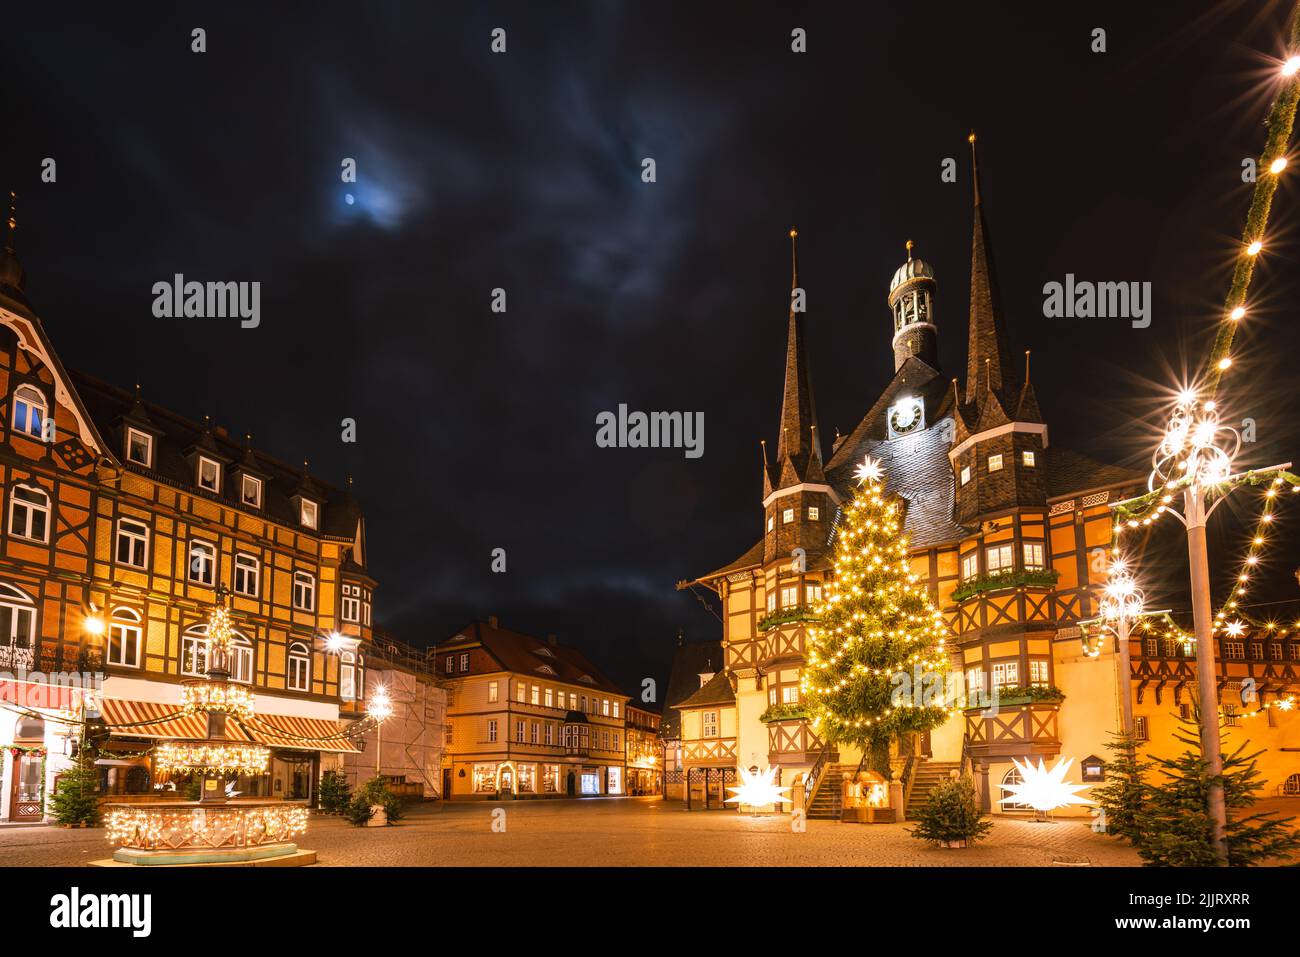 Wernigerode town hall at night with illumination at Christmas time. sky with some moonlight Stock Photo